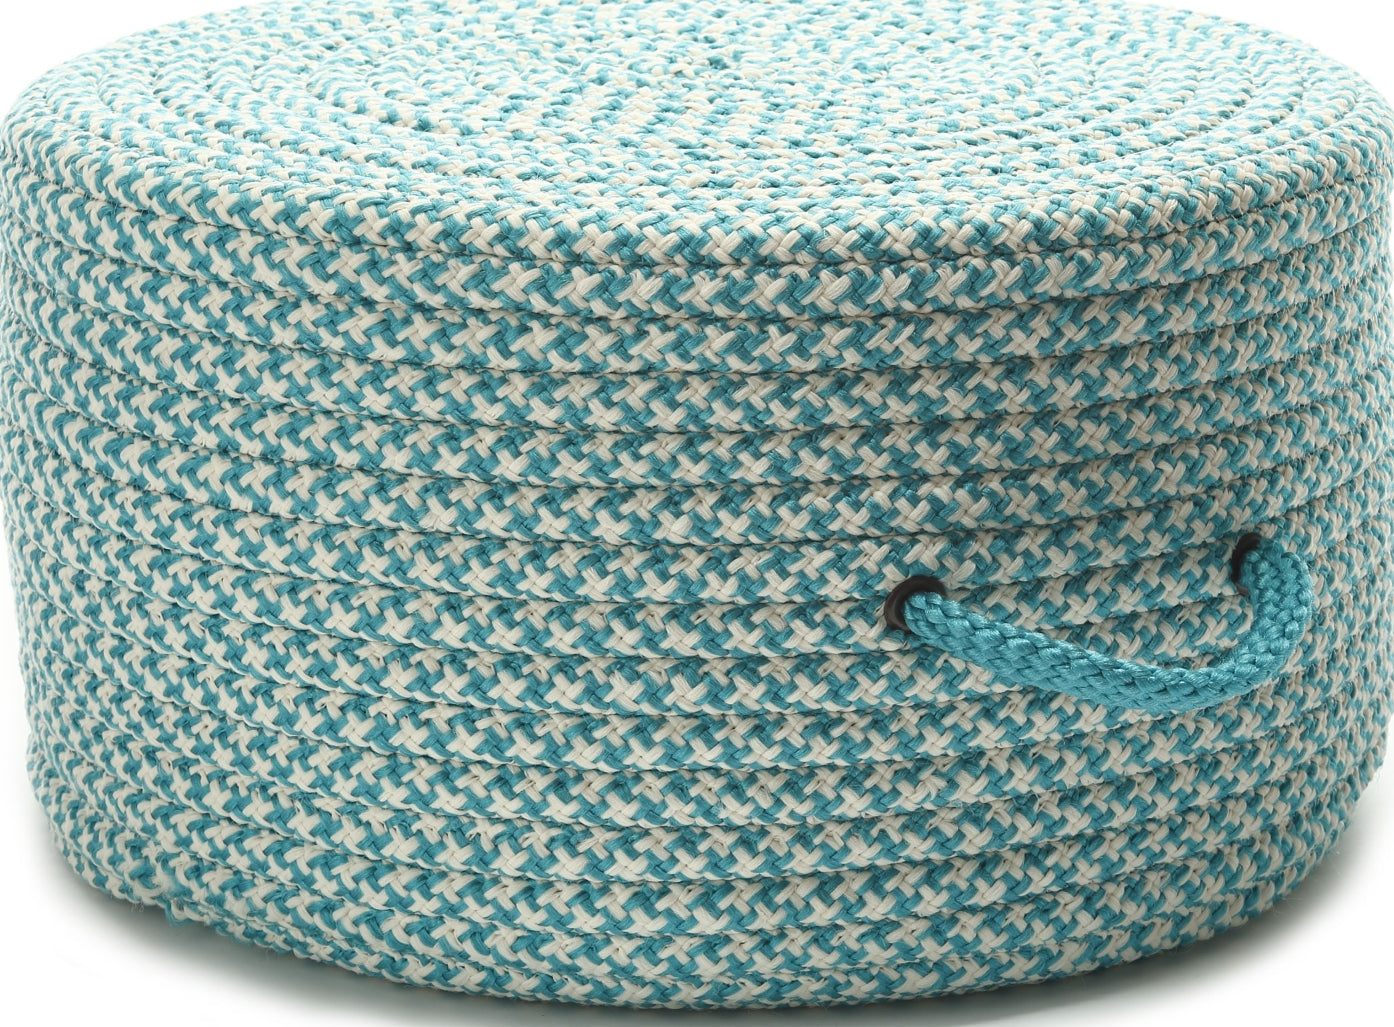 Colonial Mills Houndstooth Pouf UF57 Turquoise